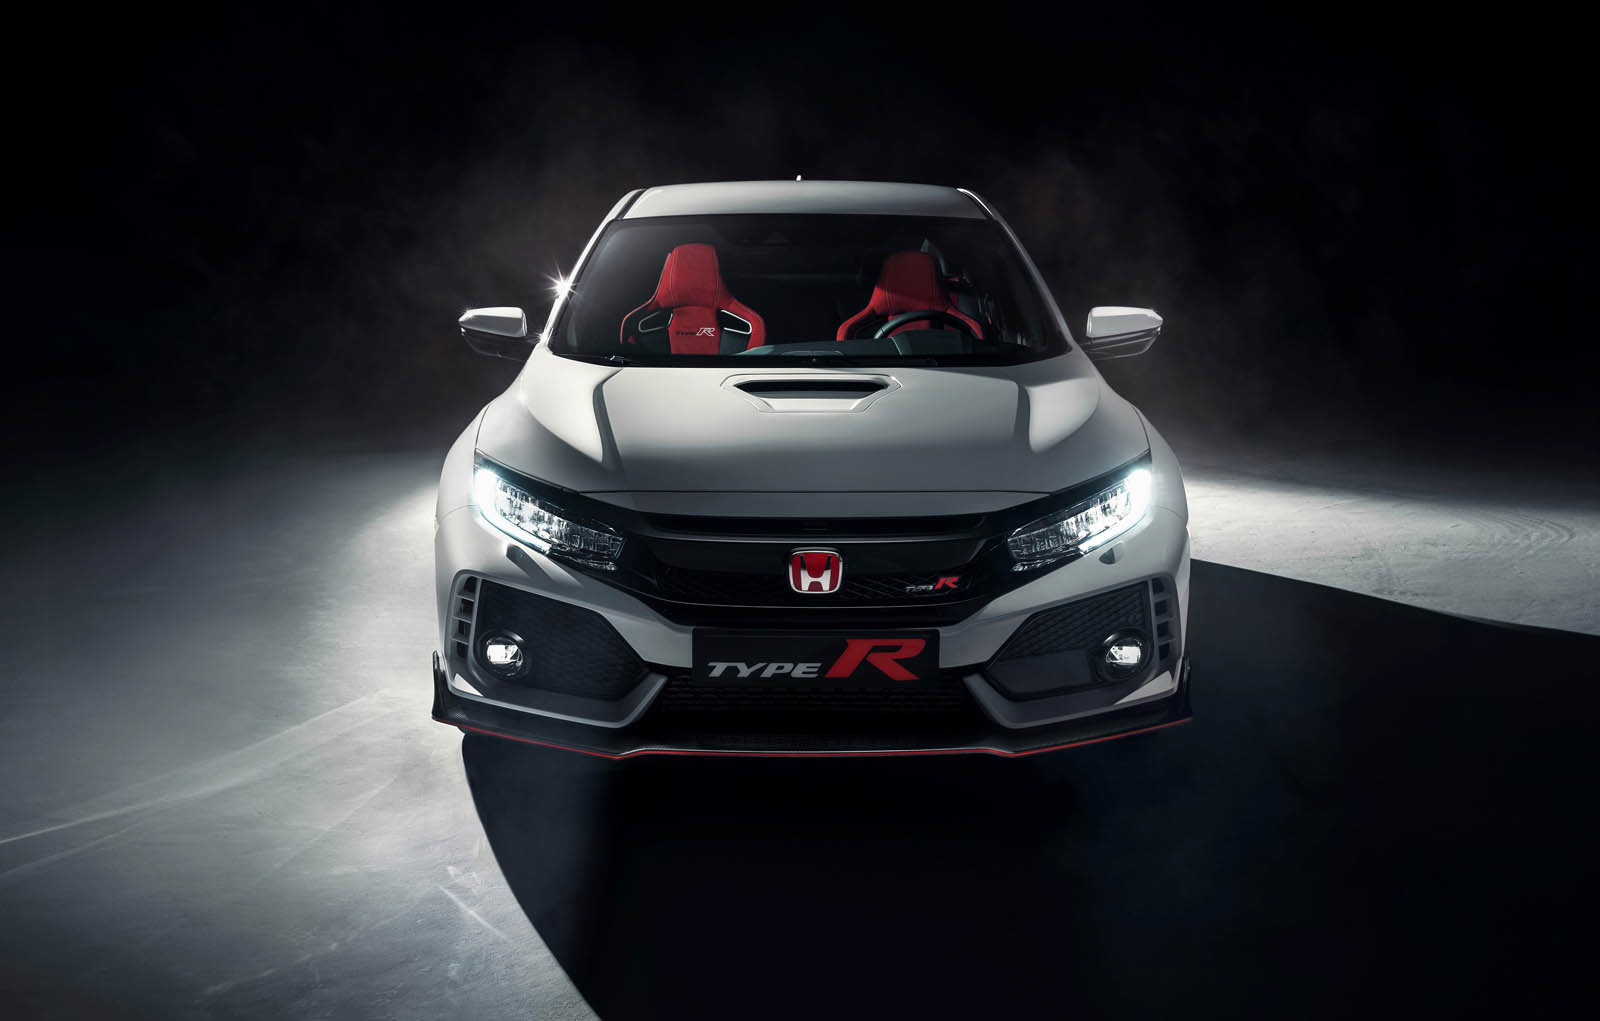 New Honda Civic Type R Is Now The Fastest Fwd Car Around Nurburgring